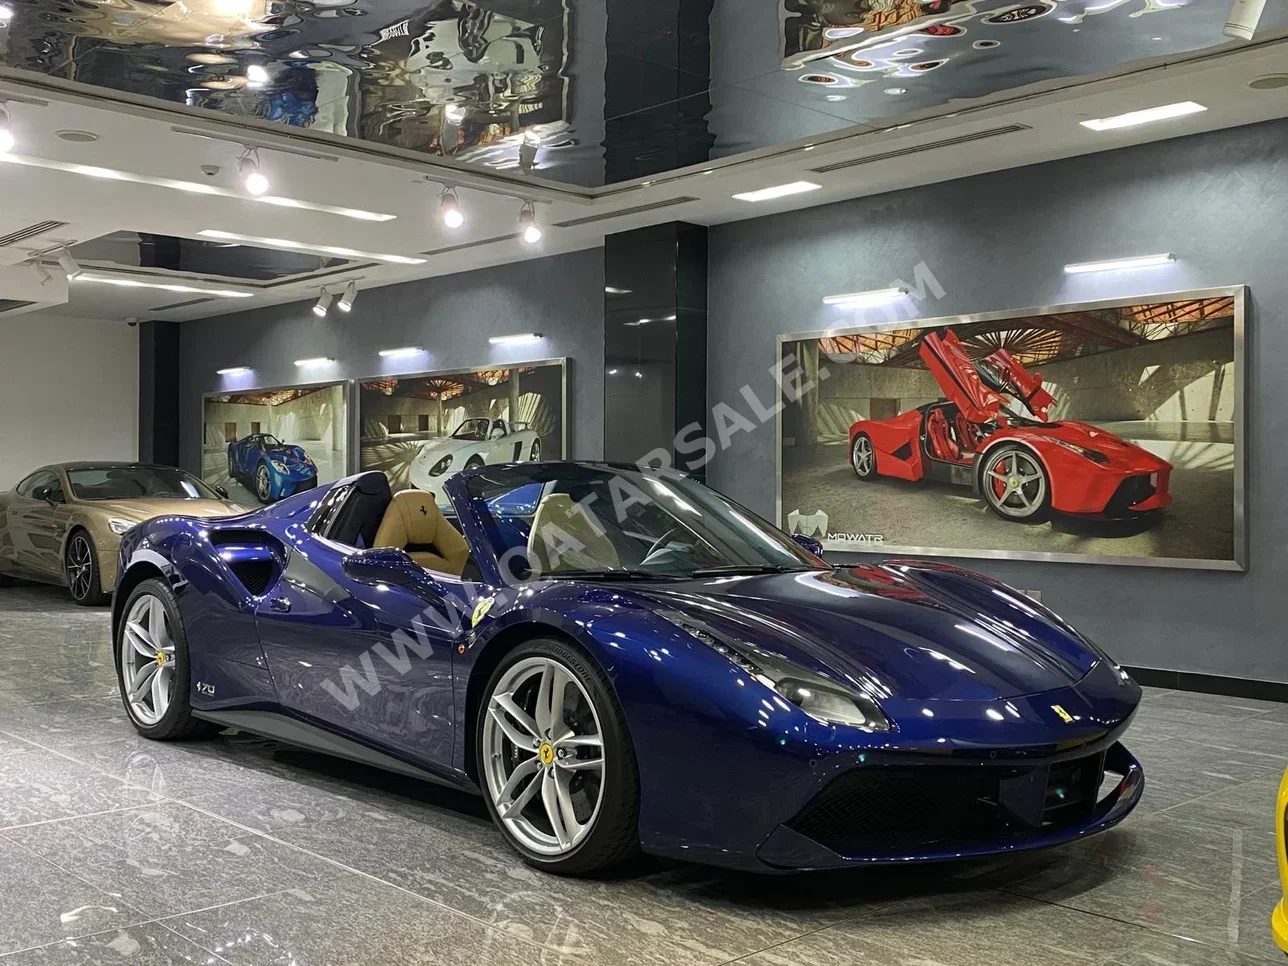 Ferrari  488  Spider  2018  Automatic  0 Km  8 Cylinder  Rear Wheel Drive (RWD)  Coupe / Sport  Blue  With Warranty